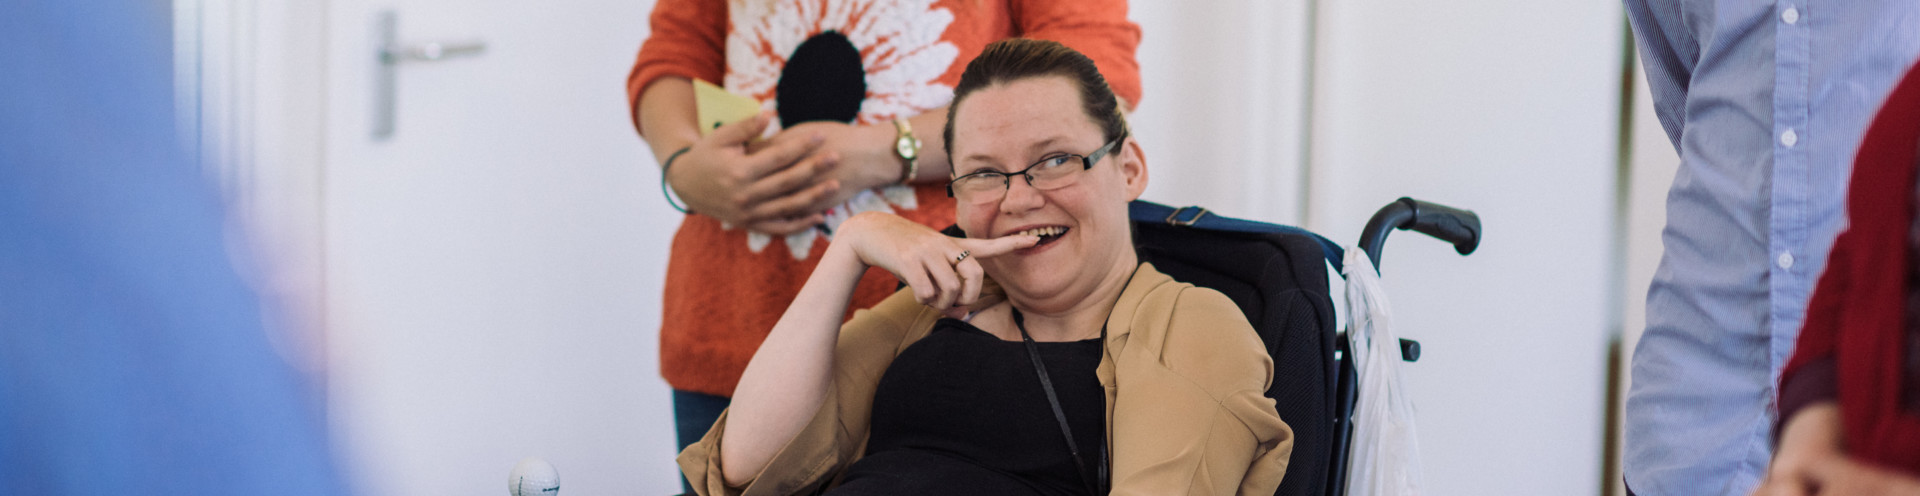 A Gloucestershire woman with disability with other community members